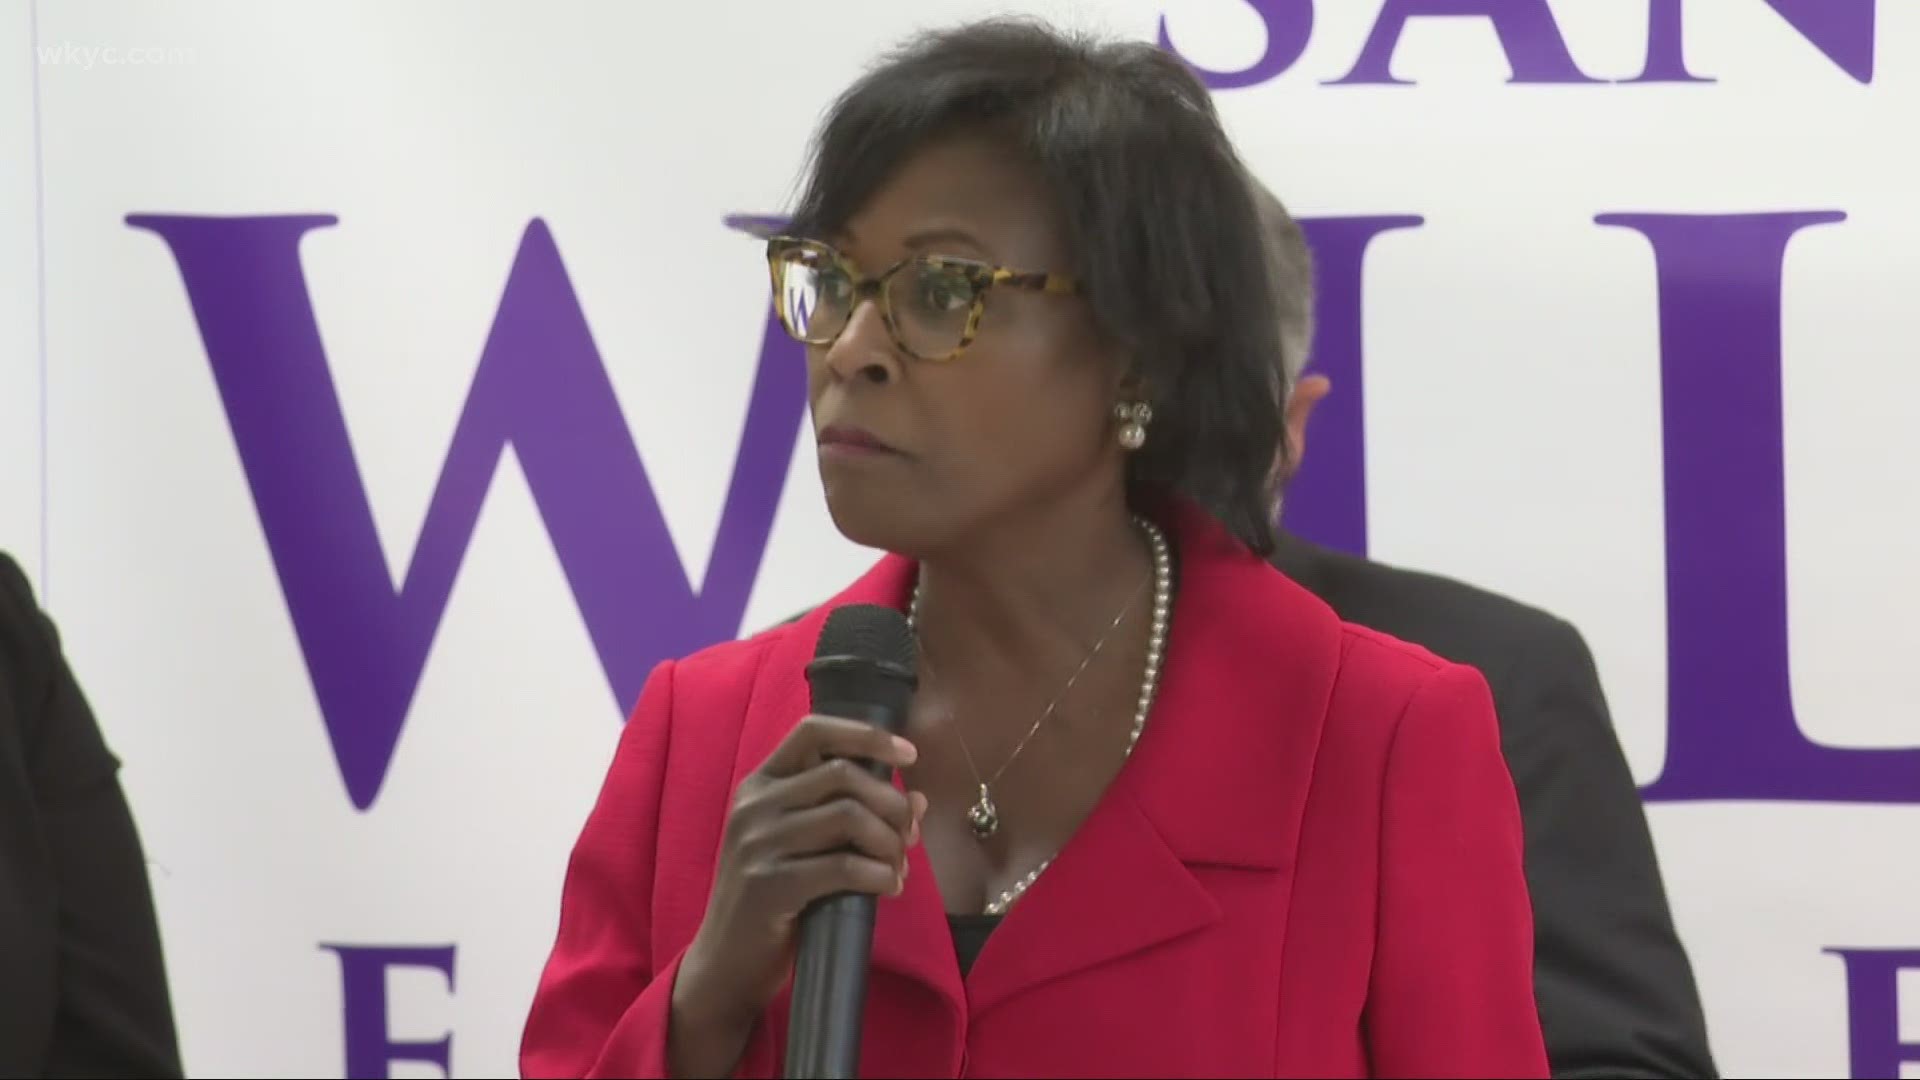 Ohio State senator Sandra Williams has announced that she is entering the 2021 Cleveland mayoral race.